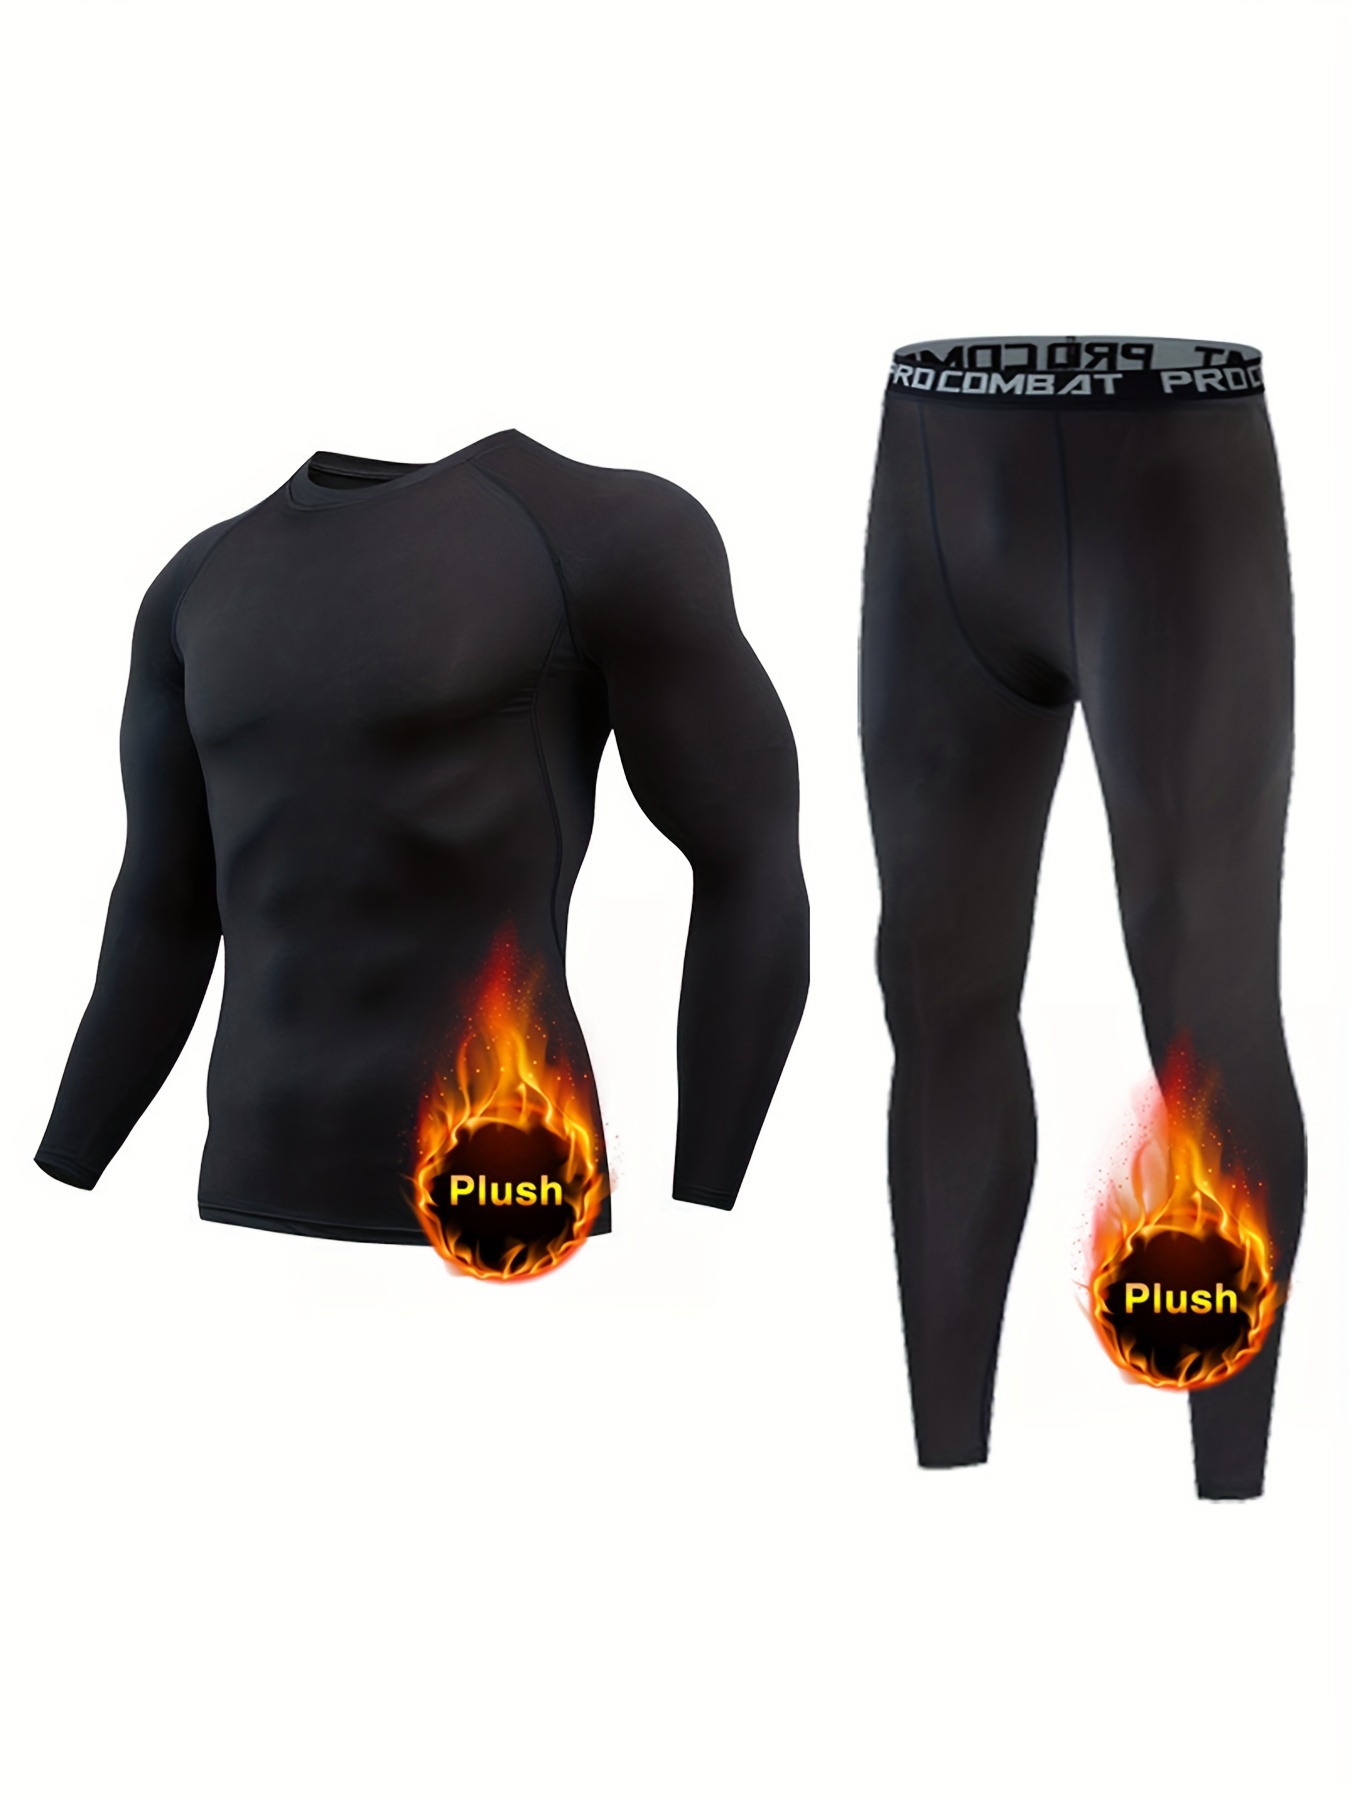 Truactivewear Thermals Thermal Sets Moisture Wicking Nepal